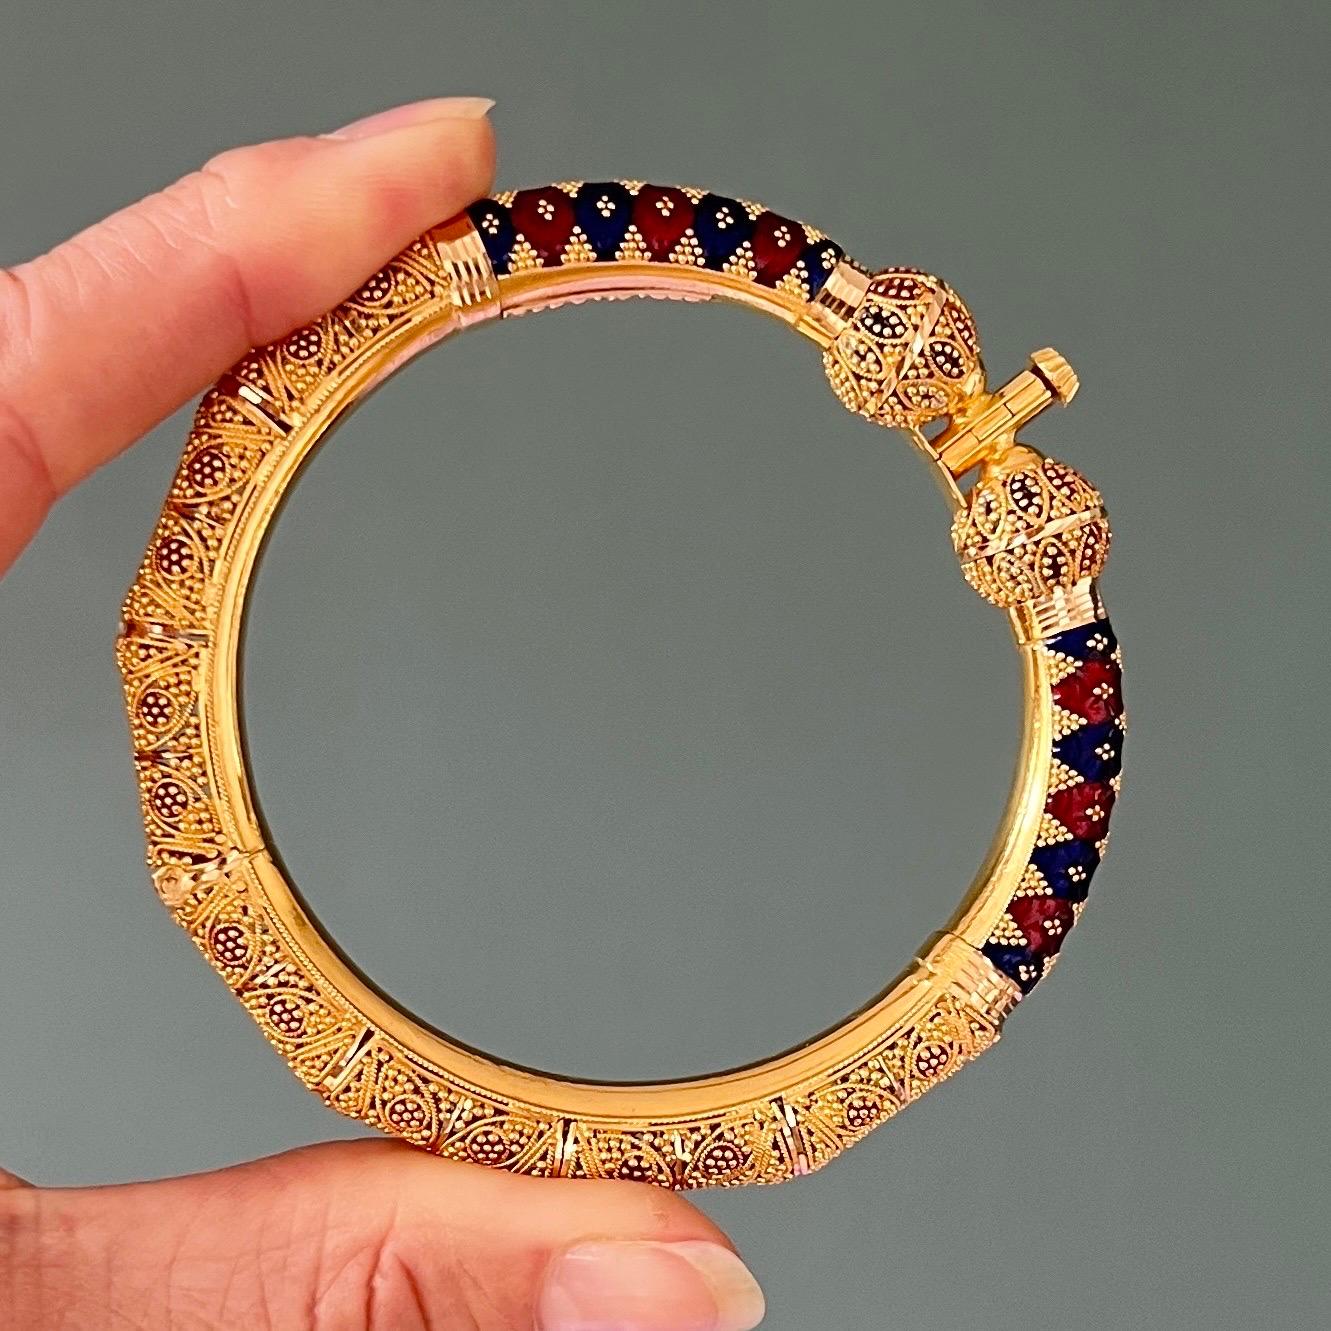 An ornate 20 karat yellow gold filigree enameled bangle bracelet. The gold of the bracelet is richly decorated with very fine filigree work and granulation. Next to the closure, the bangle is set with two filigree balls and counterparts of enameled